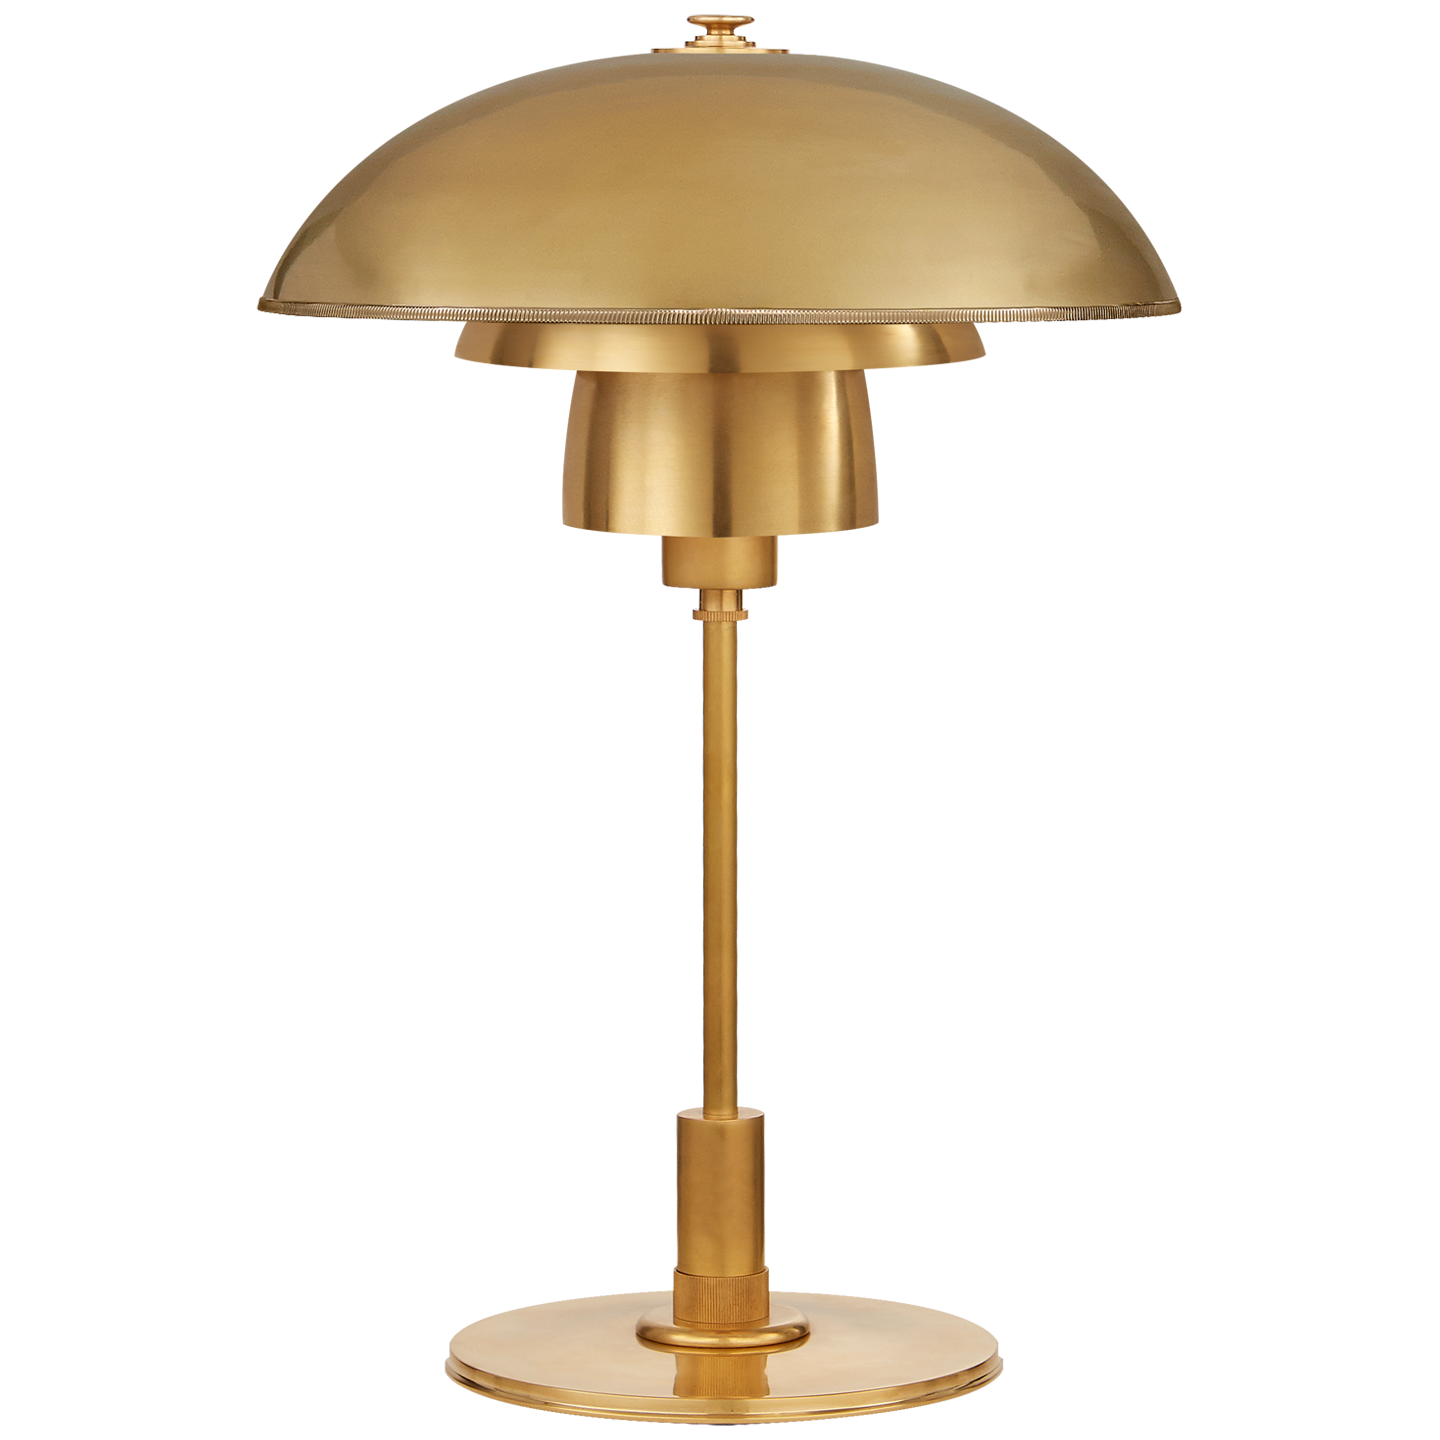 Whitman Desk Lamp in Hand-Rubbed Antique Brass with Hand-Rubbed Antiqu –  Gramercy Home Design